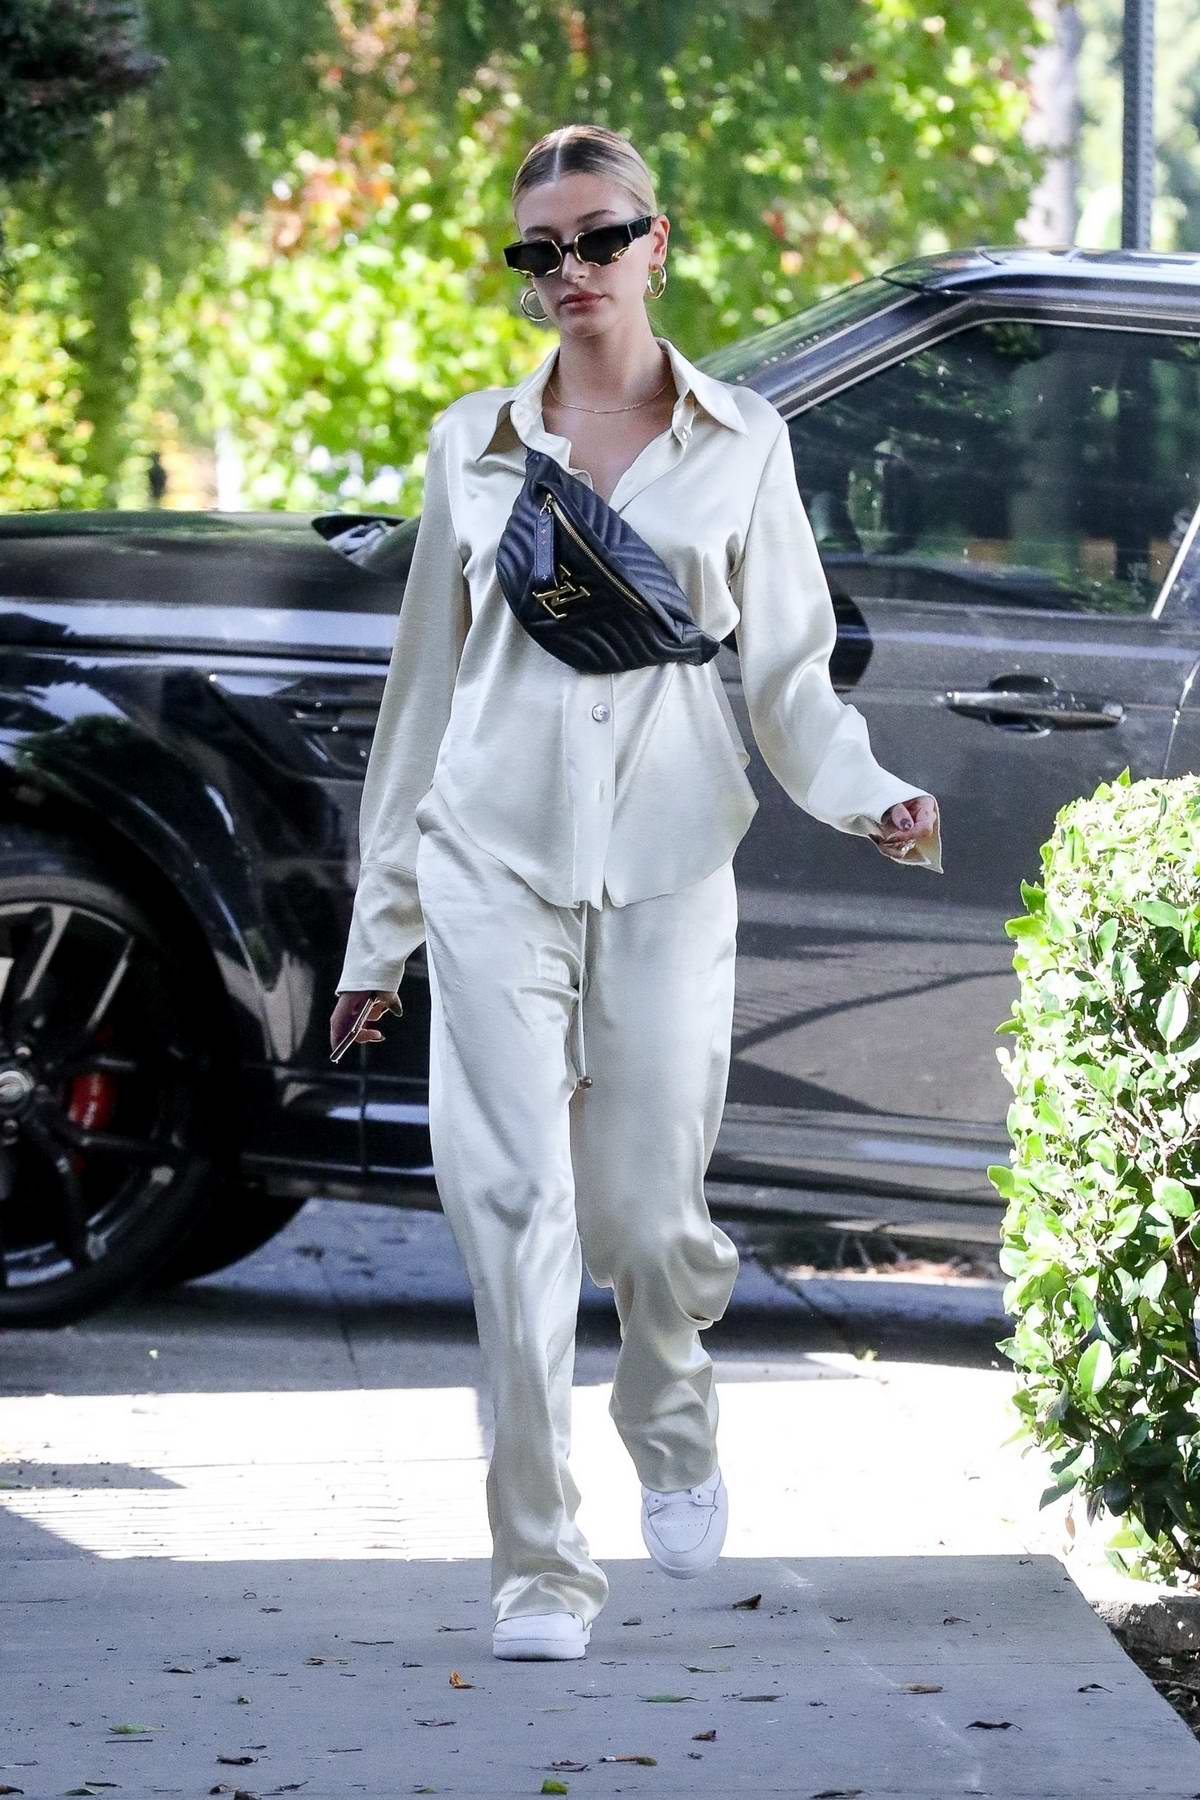 Hailey Bieber looks casual chic in a silk outfit while out running errands  in Los Angeles